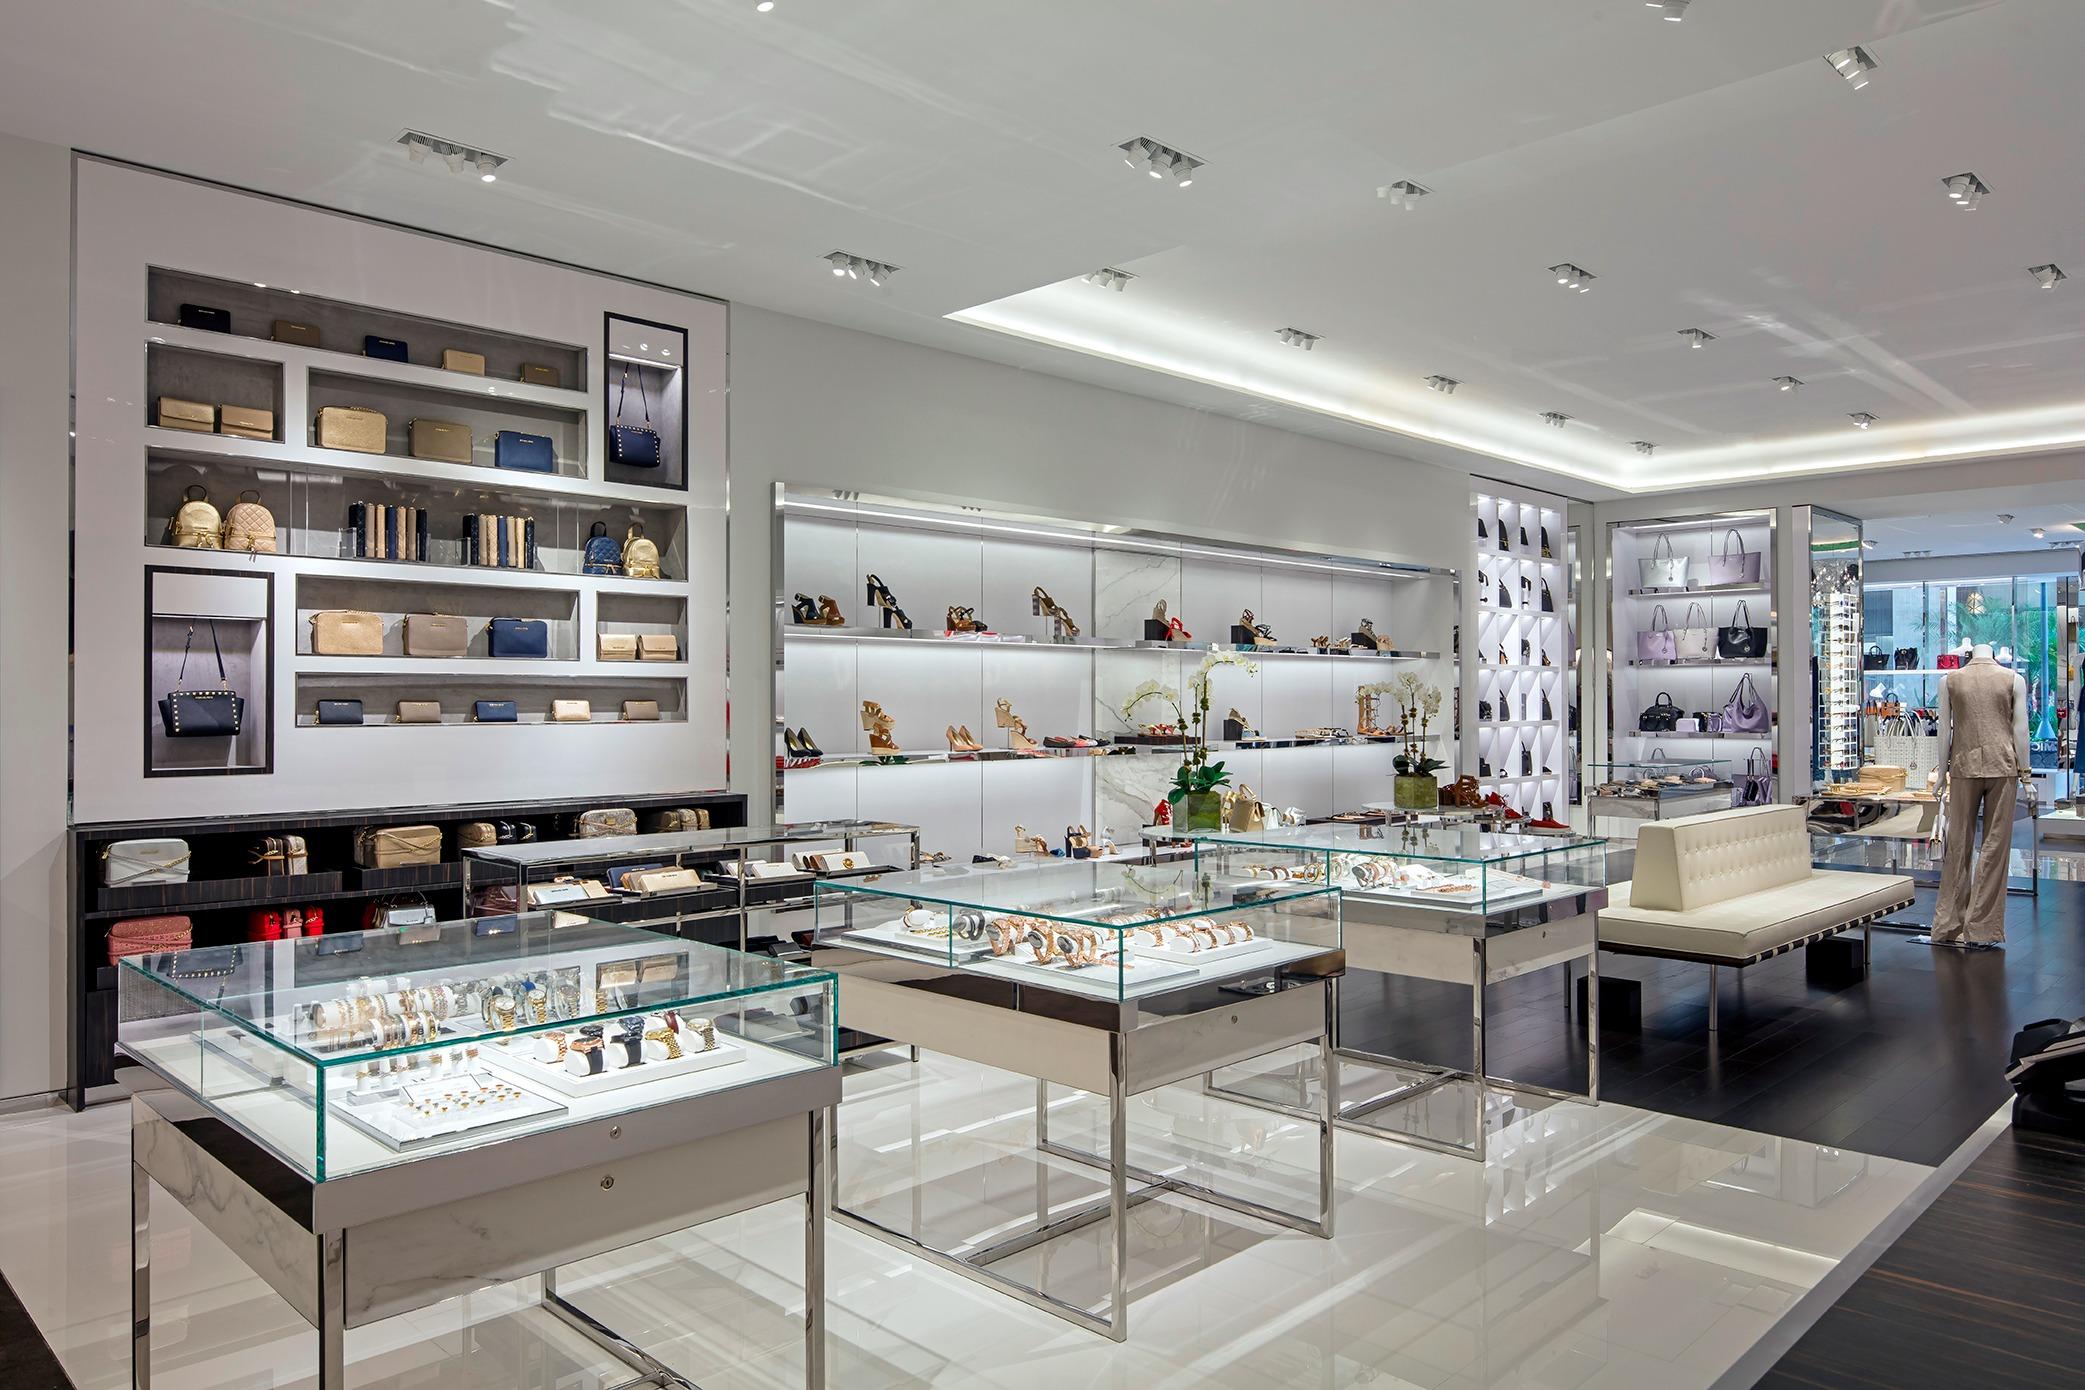 Michael Kors Unveils First U.S. Lifestyle Store in Aventura Mall